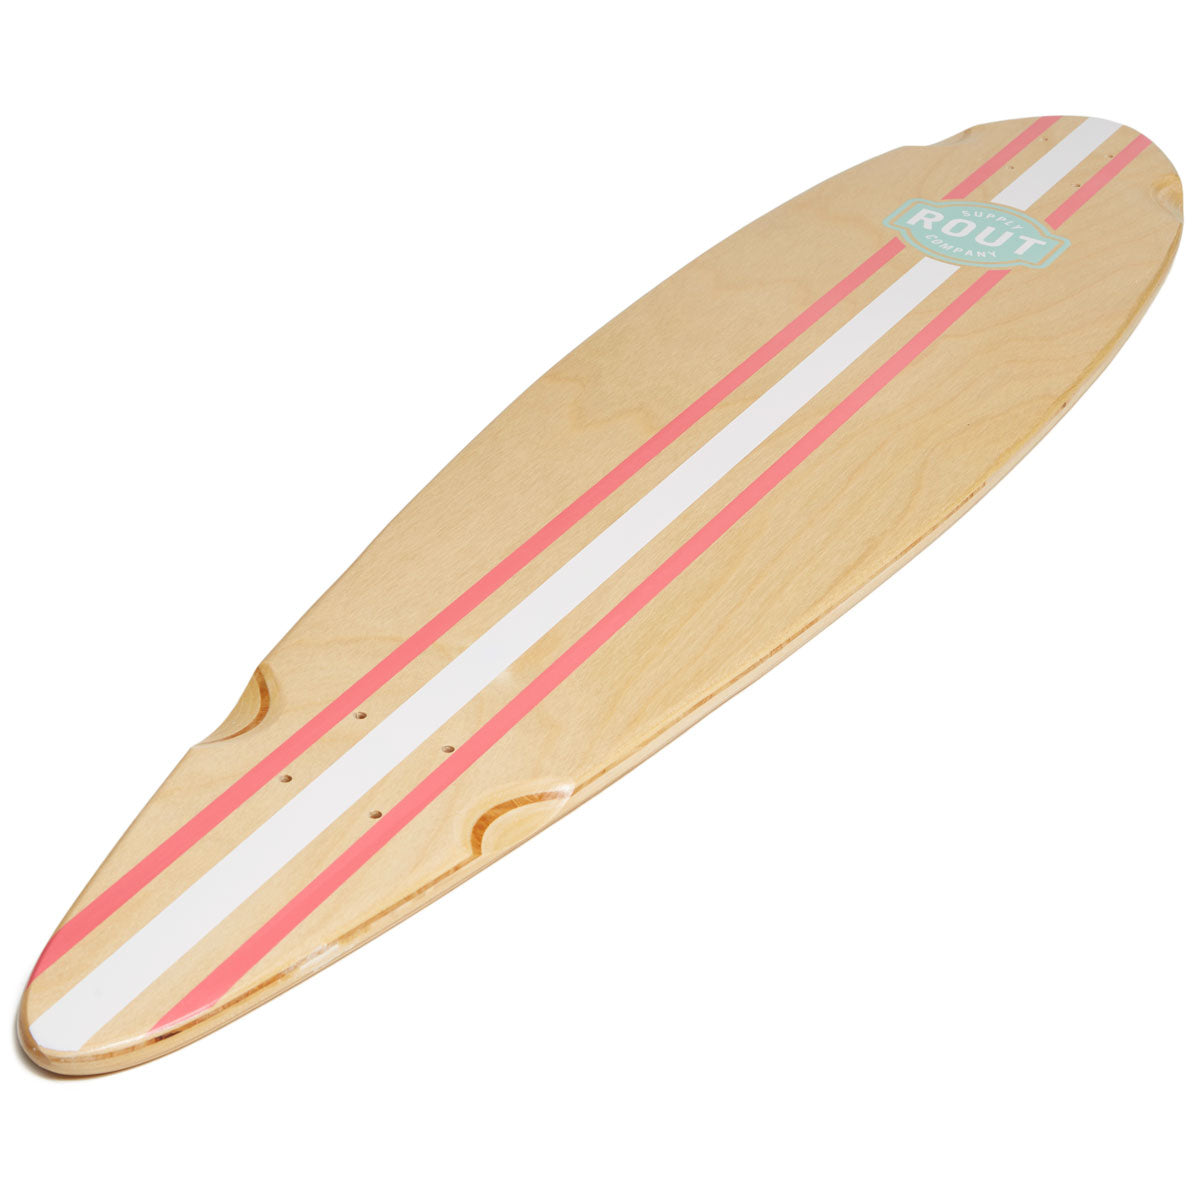 Rout Pinstripe Pintail Longboard Deck image 4